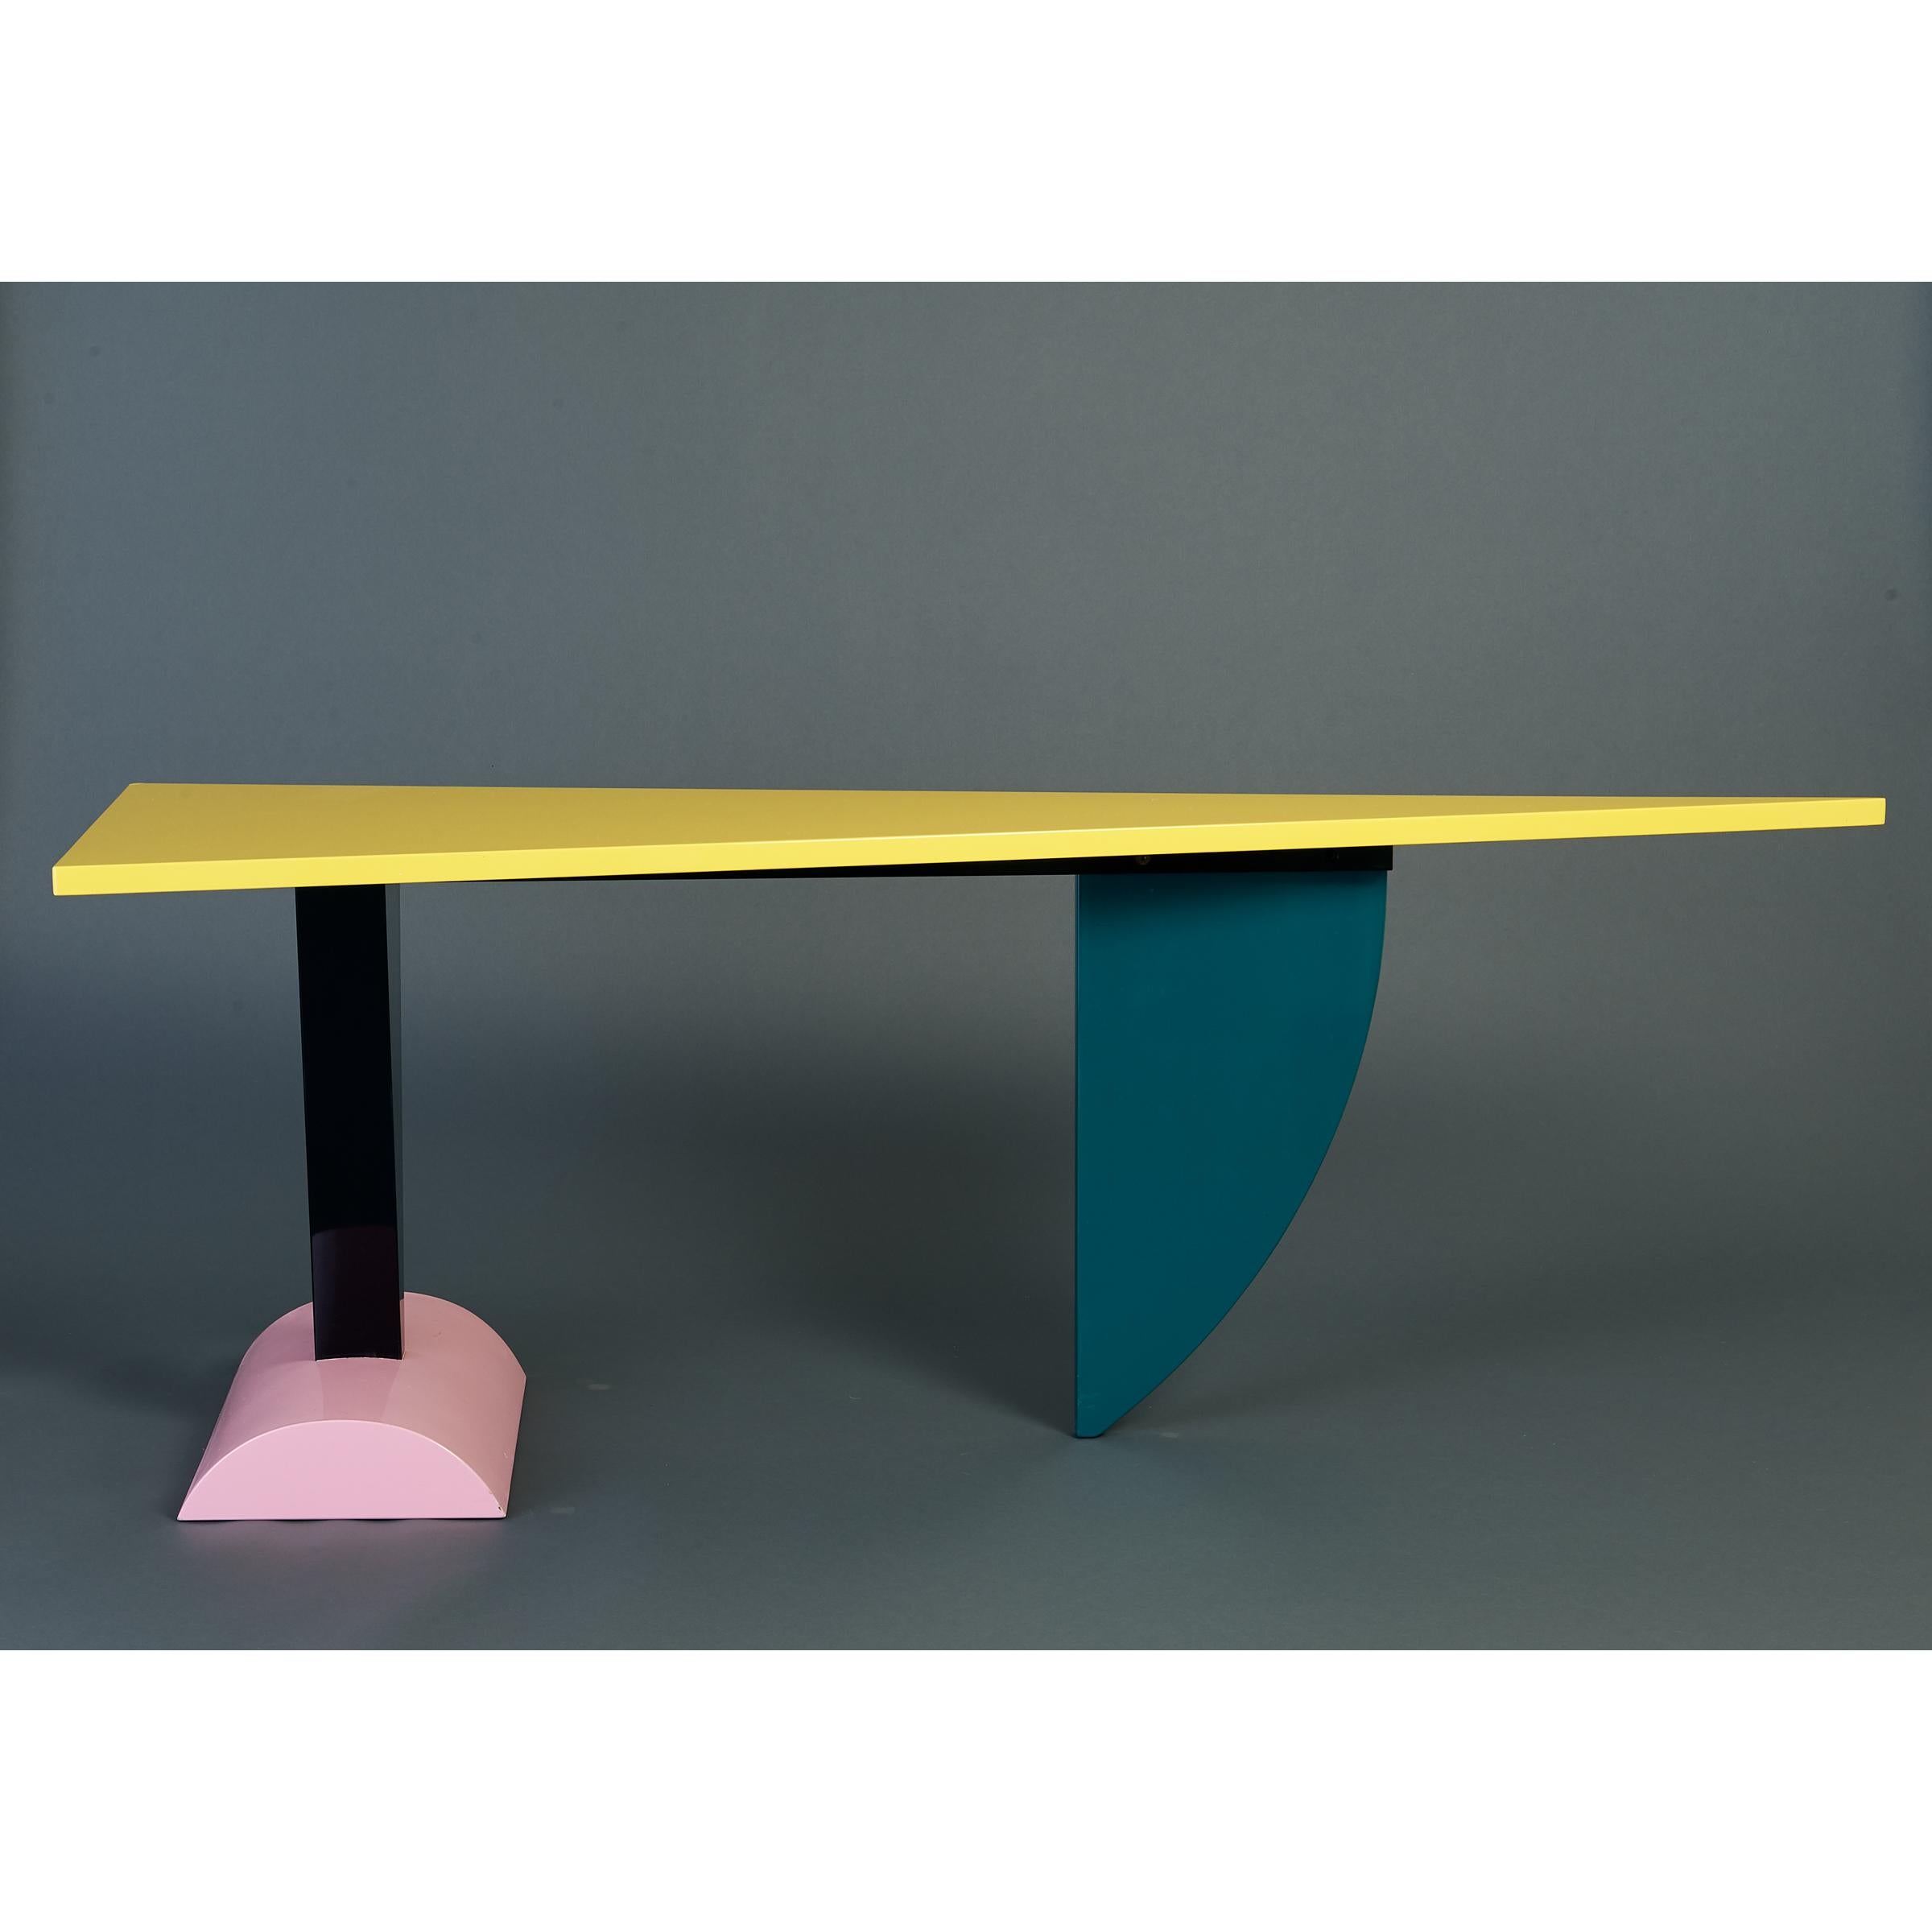 Peter Shire: Original Memphis Milano Brazil Table in Lacquered Wood, Italy 1981 im Zustand „Gut“ im Angebot in New York, NY